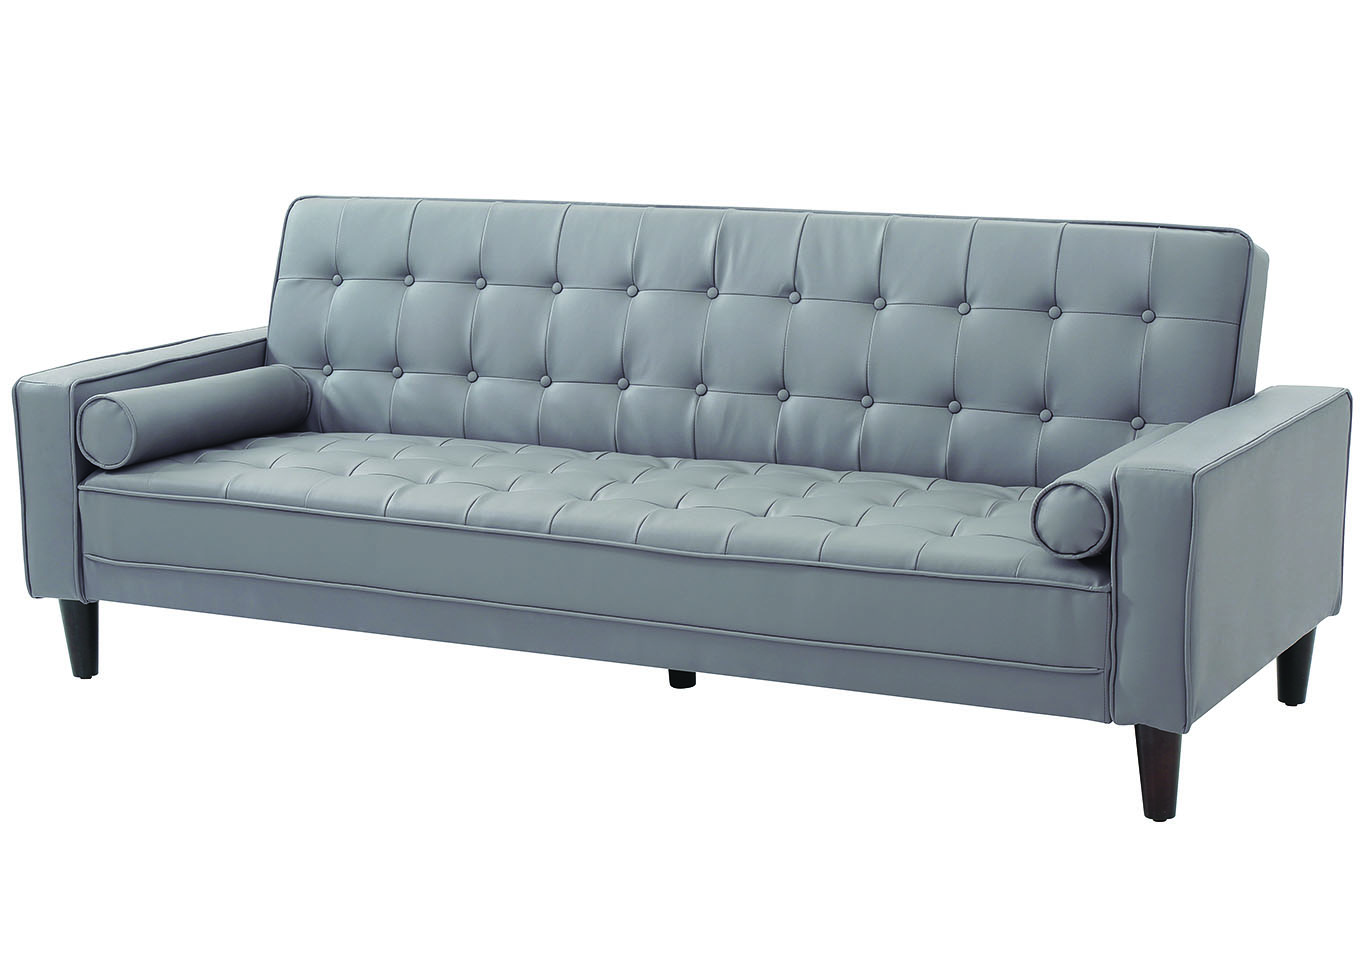 Gray Faux Leather w/Beige Welt Sofa Bed,Glory Furniture